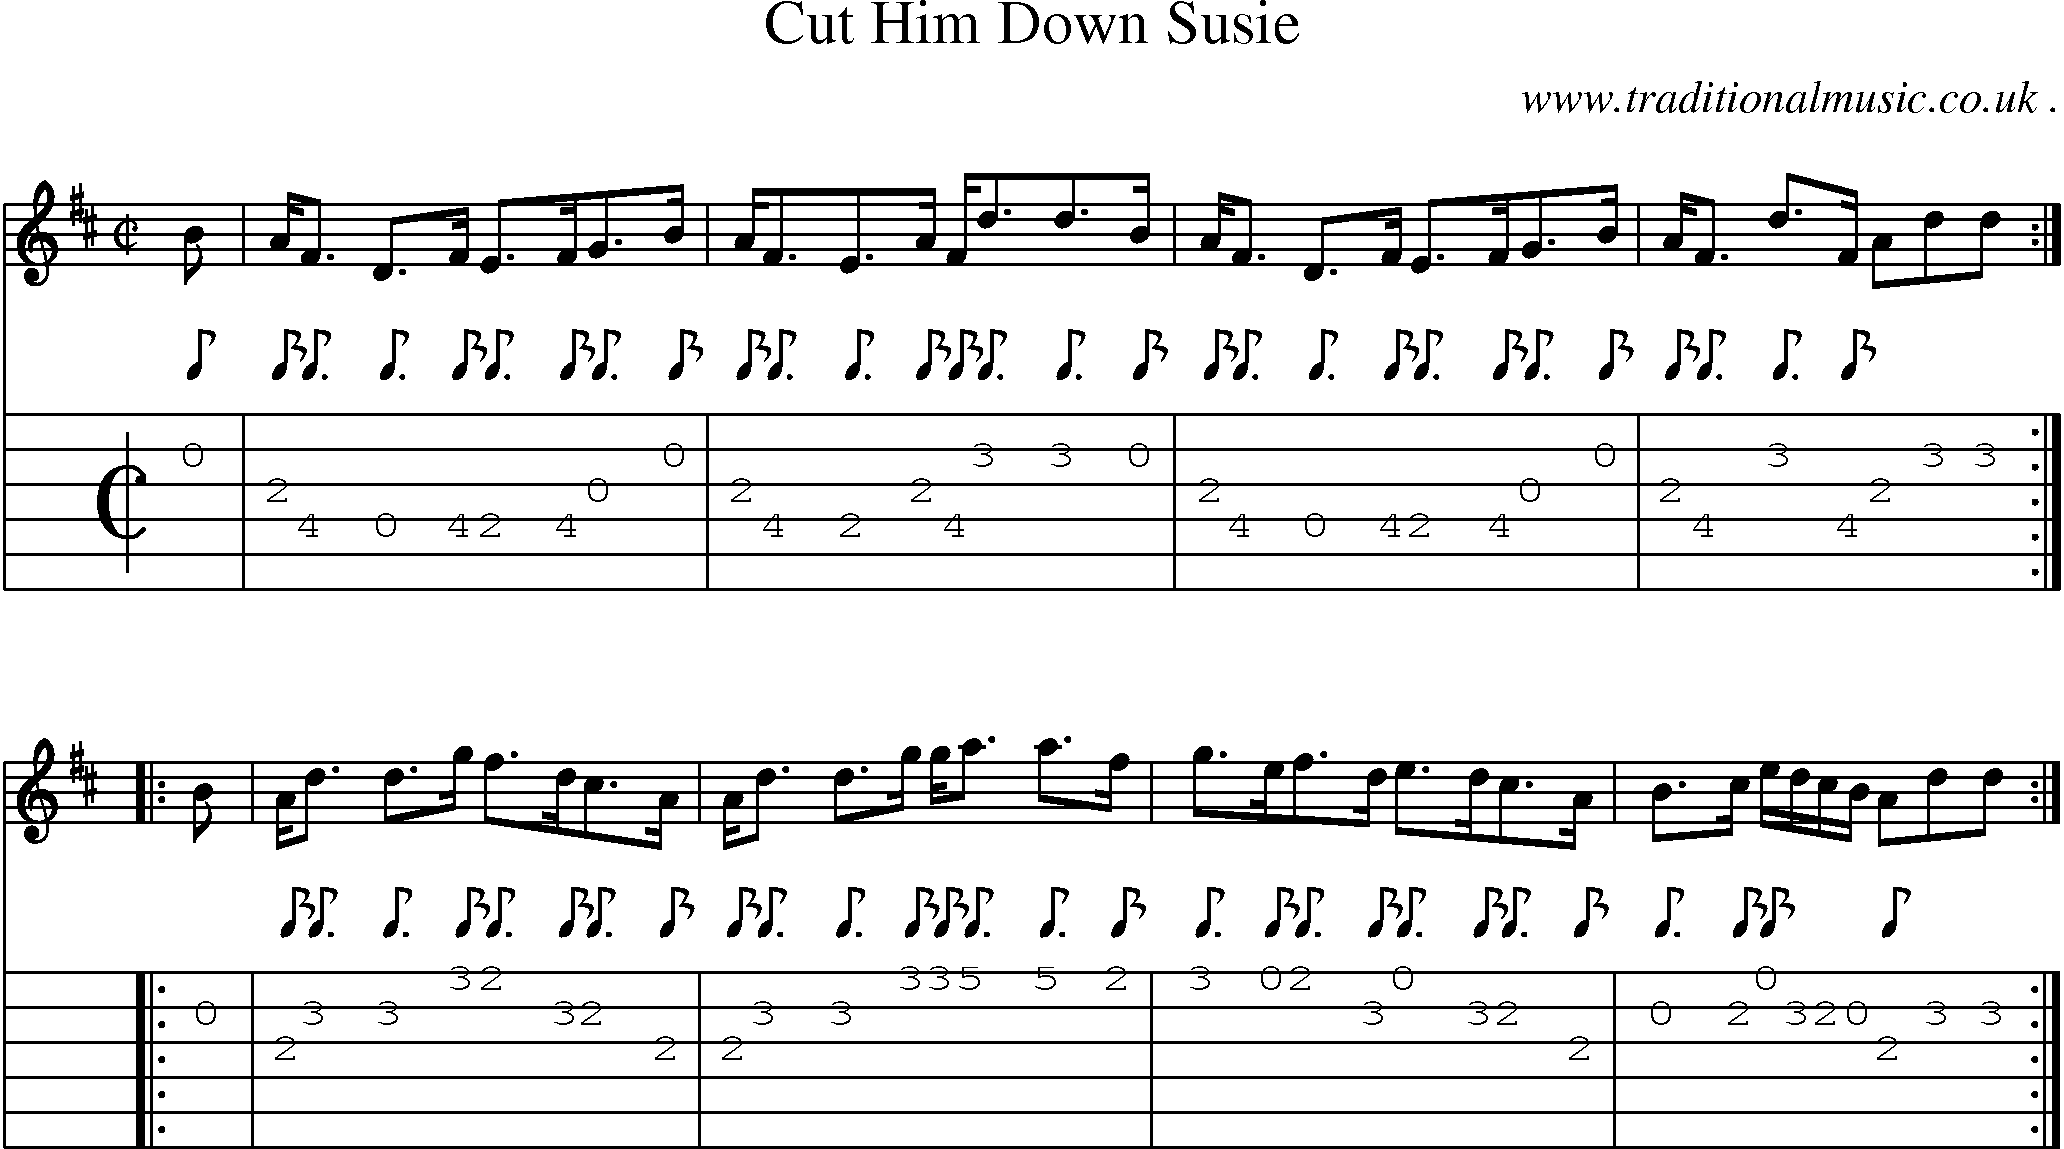 Sheet-music  score, Chords and Guitar Tabs for Cut Him Down Susie